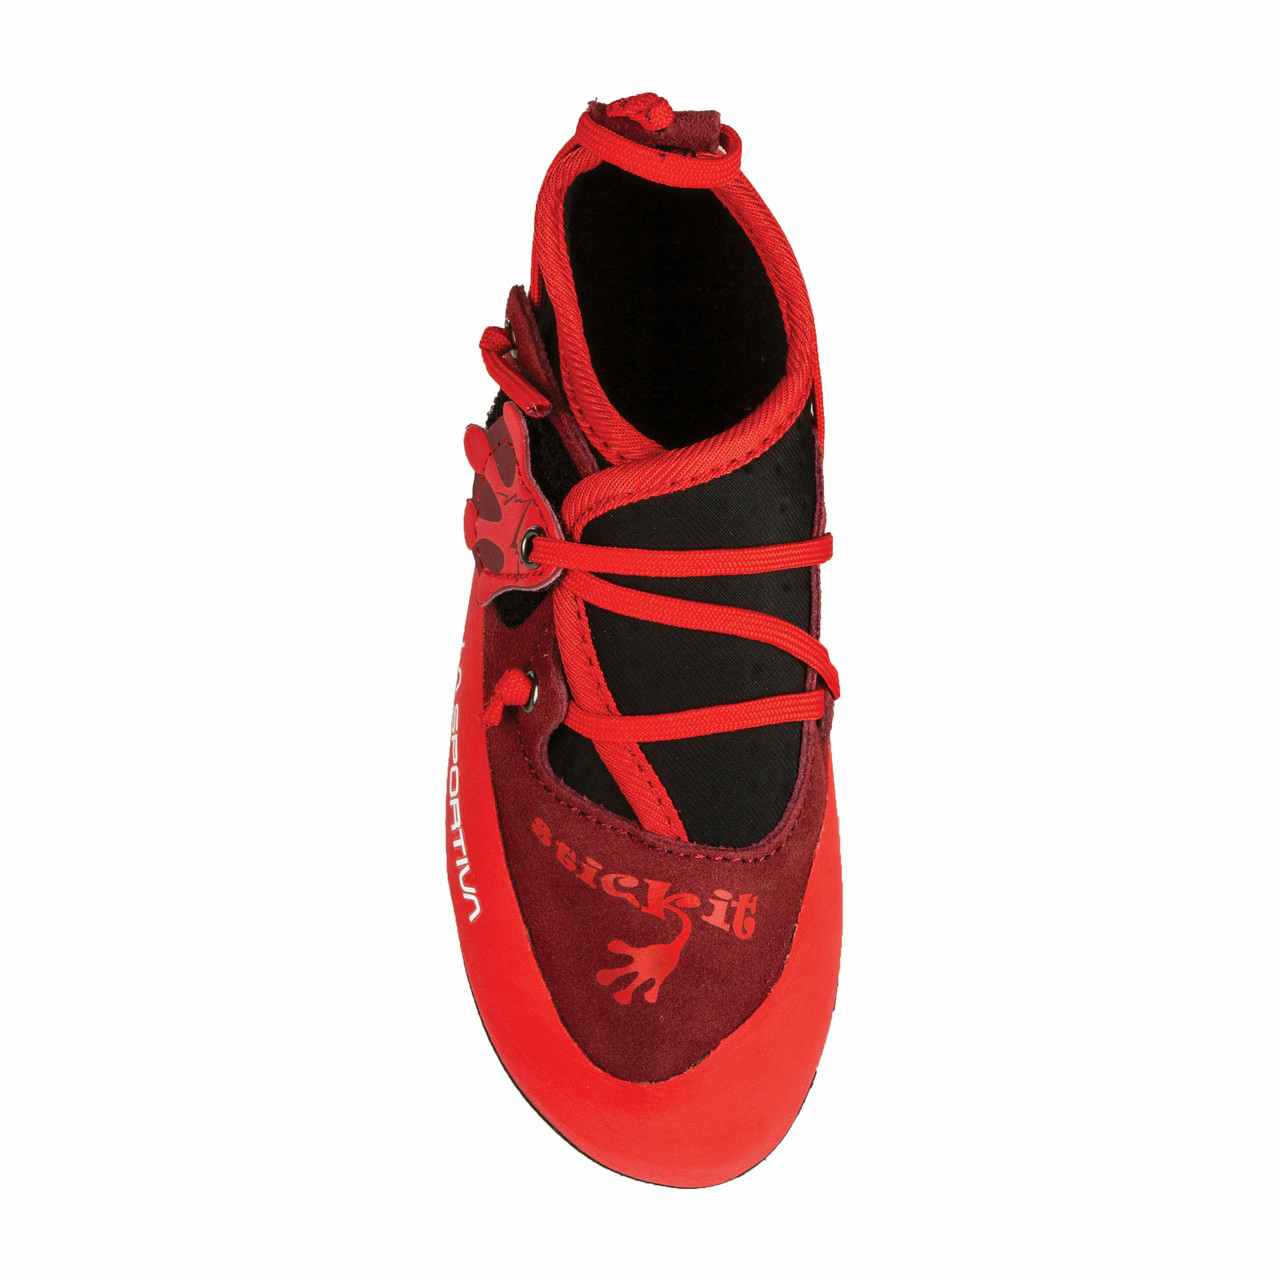 Chaussons d'escalade Stickit Chili/Coquelicot